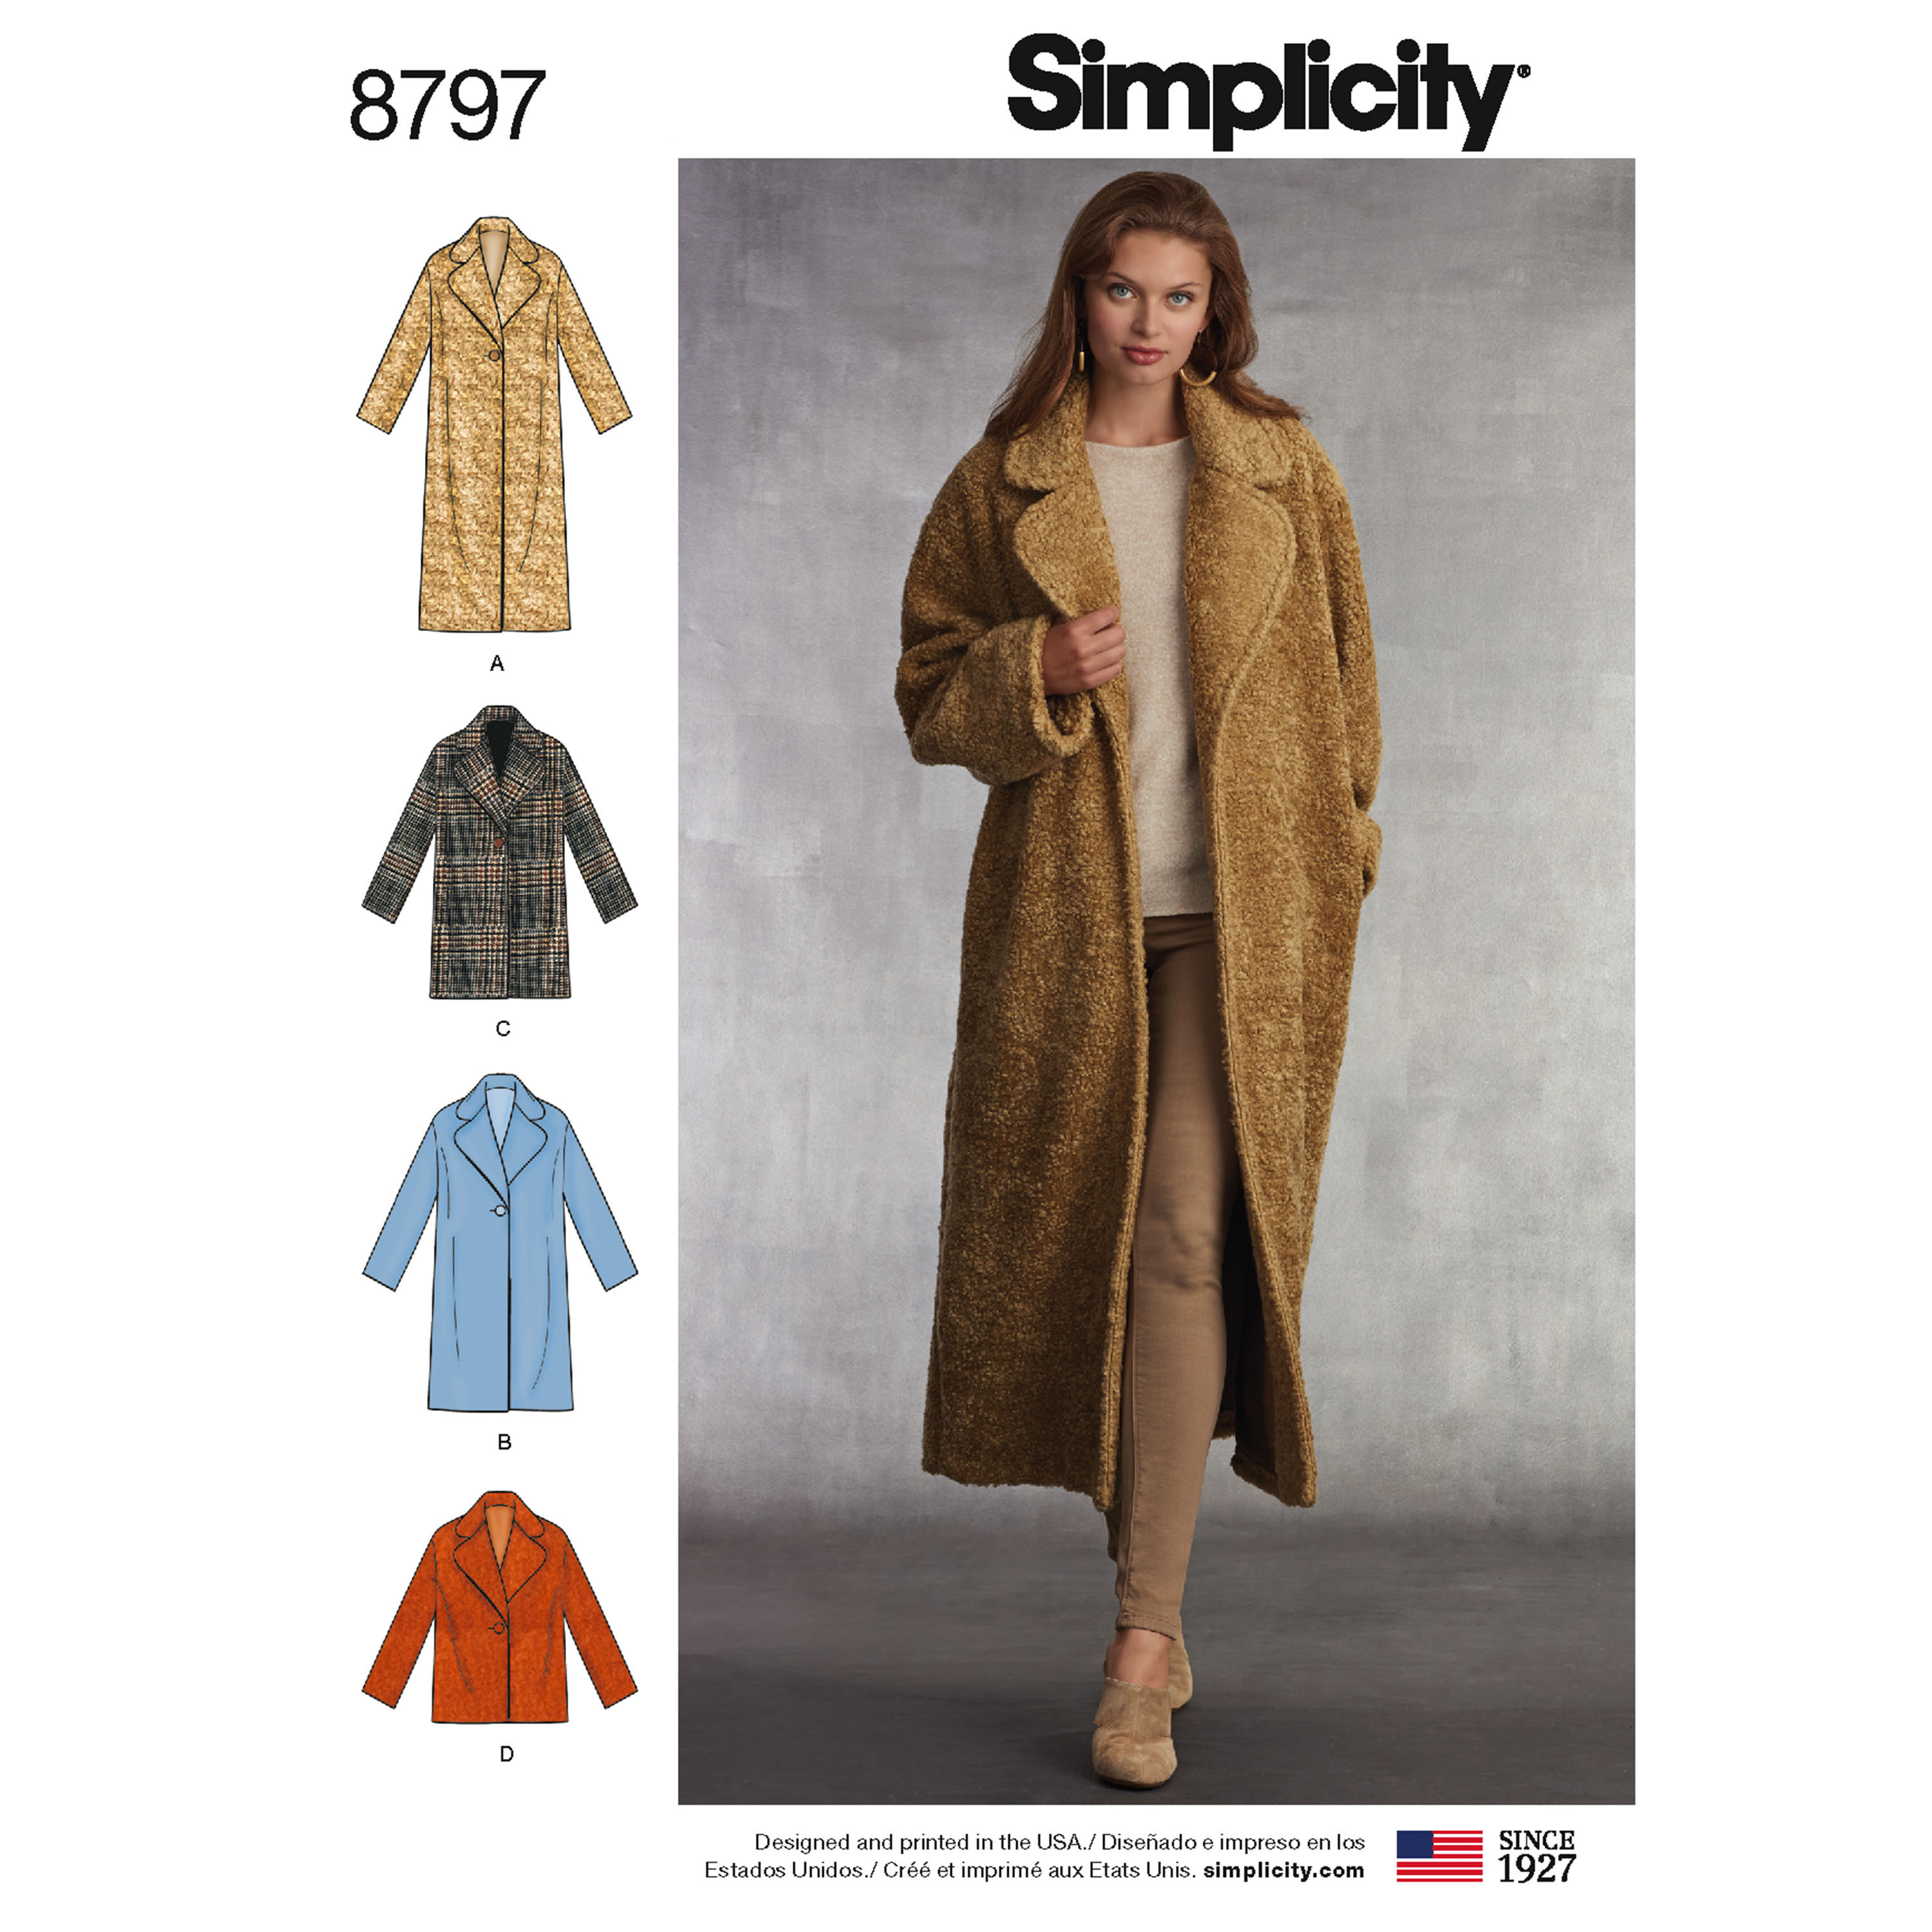 Simplicity 8797 Misses' Loose-Fitting Lined Coat